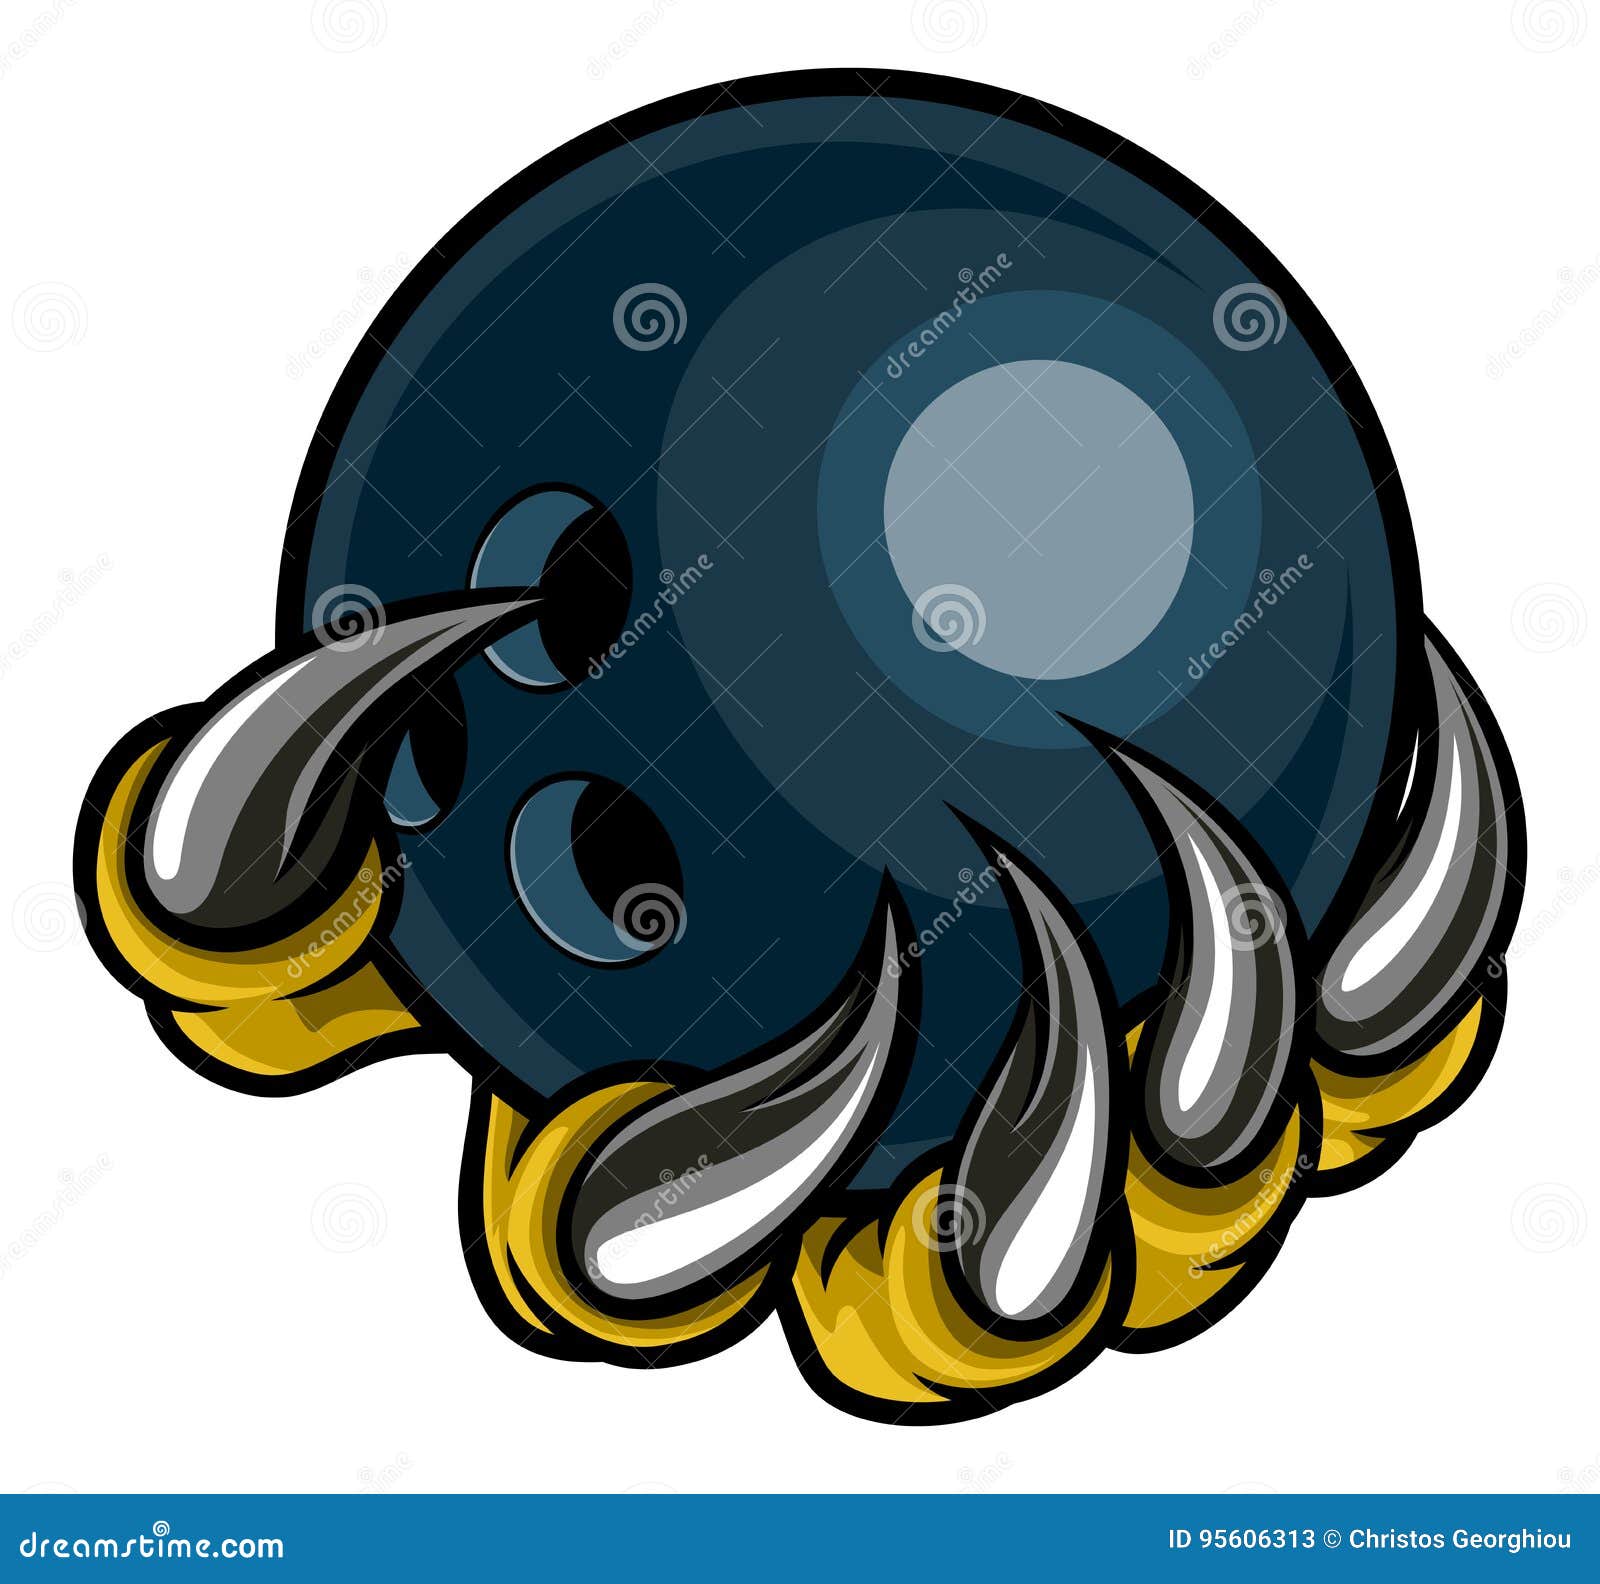 monster animal claw holding ten pin bowling ball